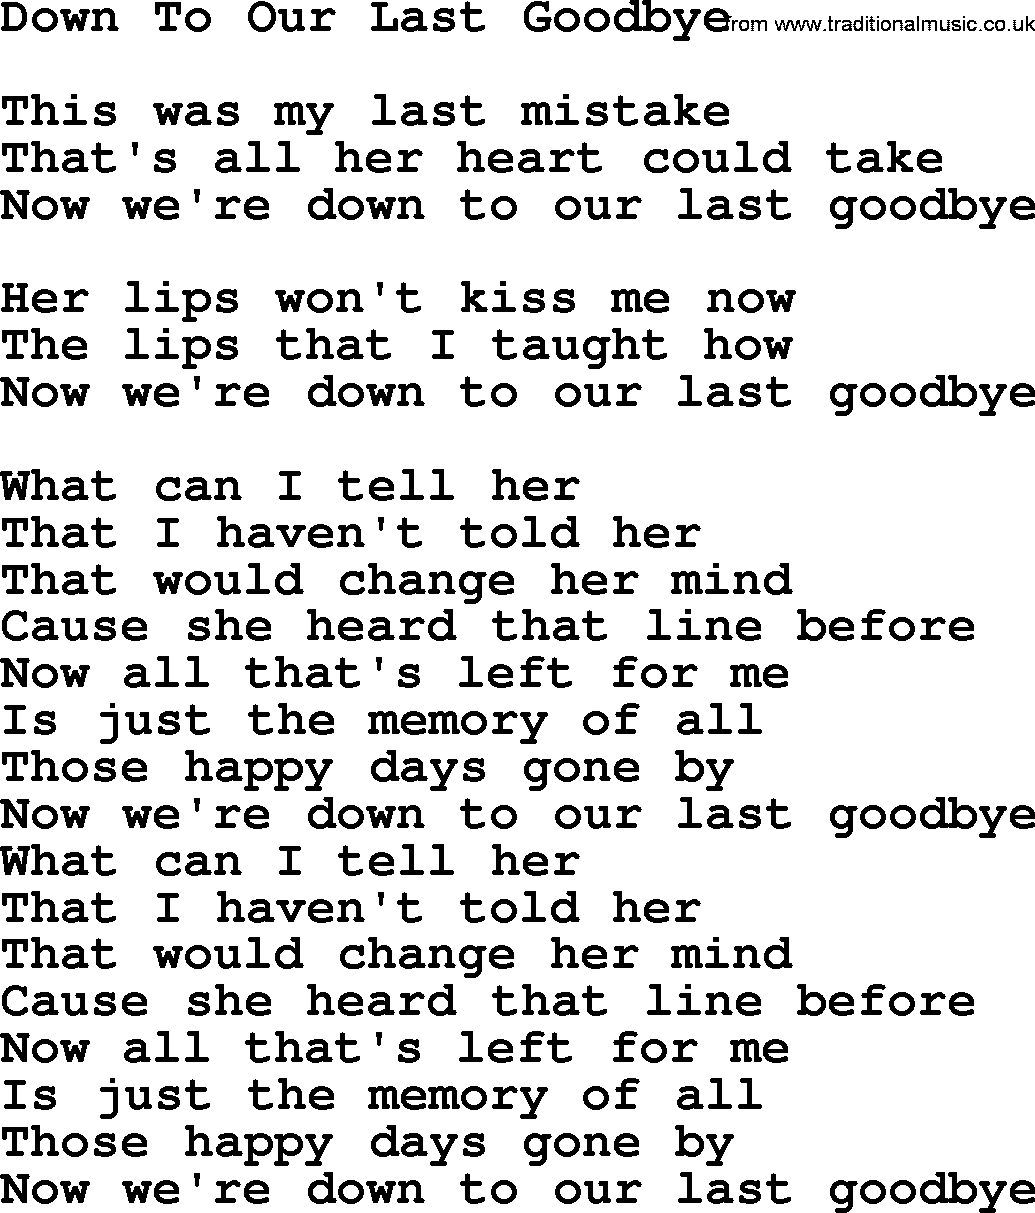 Willie Nelson song: Down To Our Last Goodbye lyrics